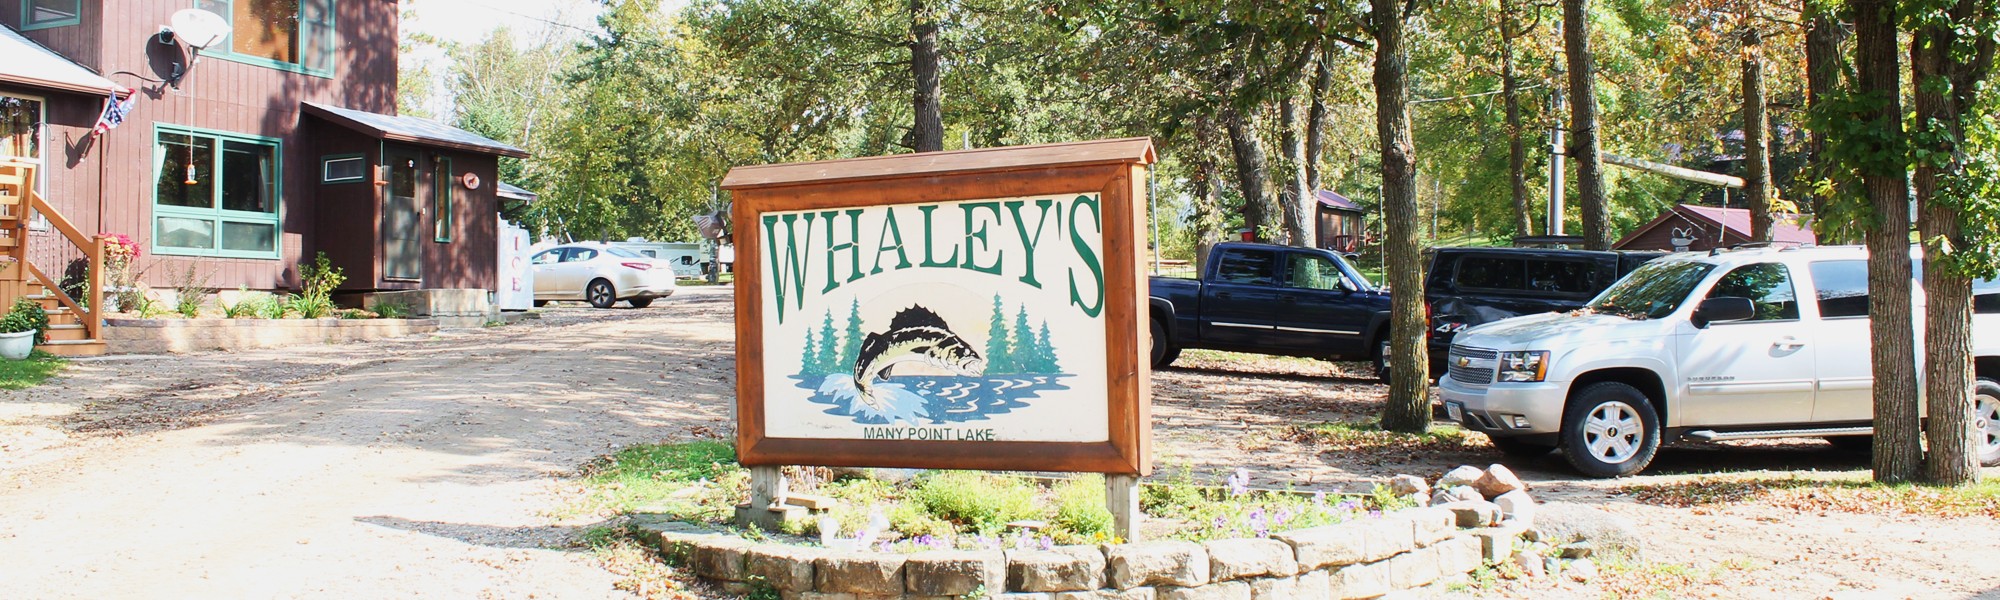 Whaley's Resort Sign